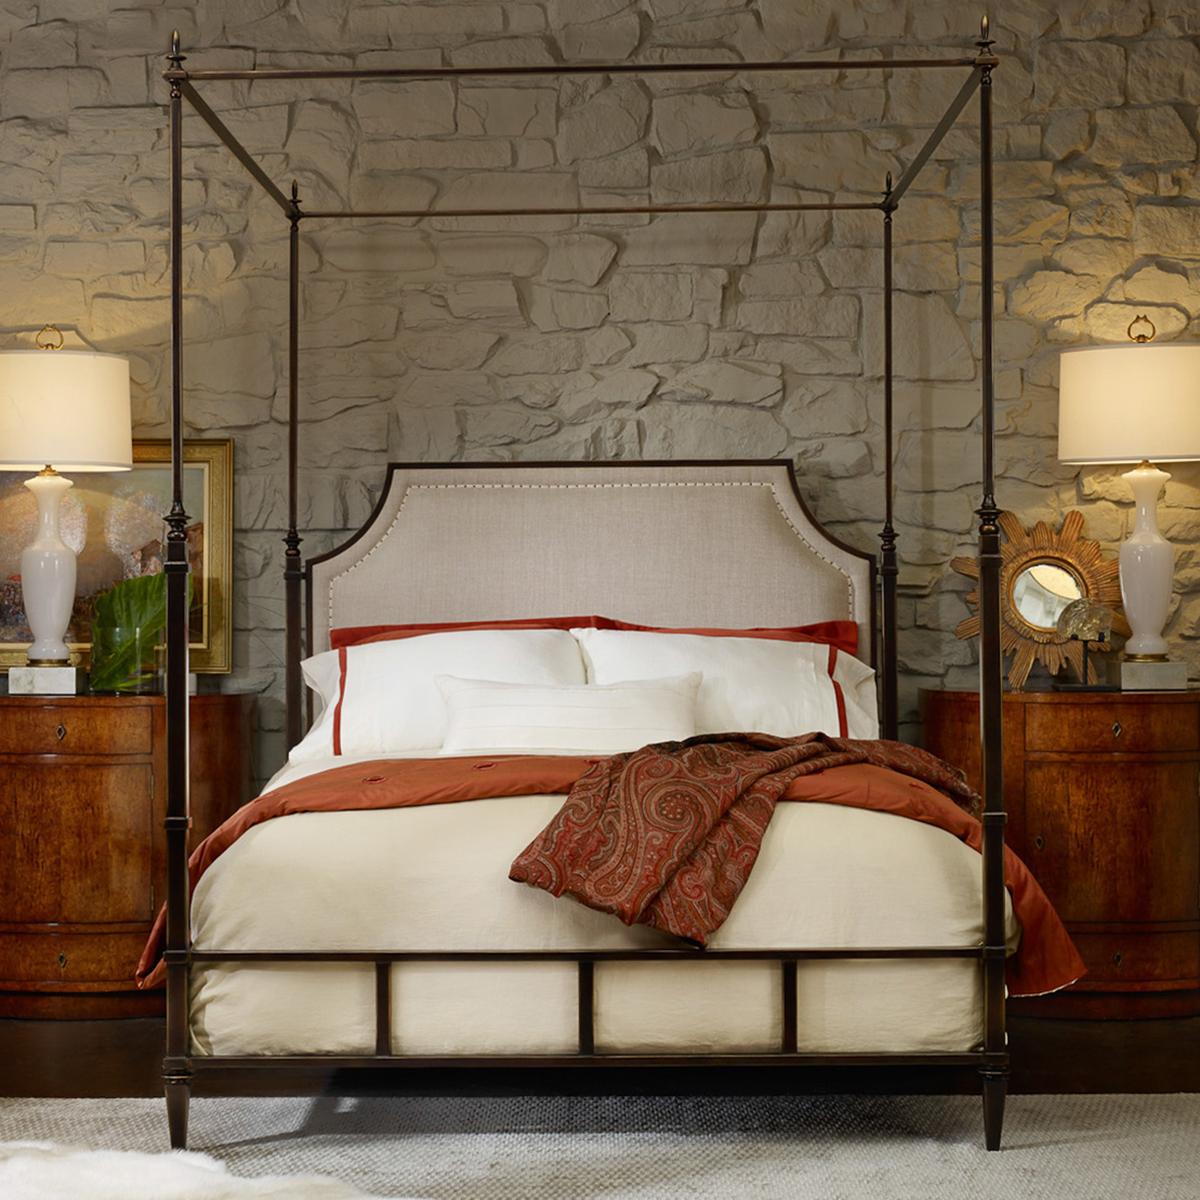 French metal canopy bed, queen size, with a bronze finish metal canopy frame with a padded upholstered headboard in a neutral linen fabric. The frame with finials, square posts, and raised on square tapered legs.

Dimensions: 67